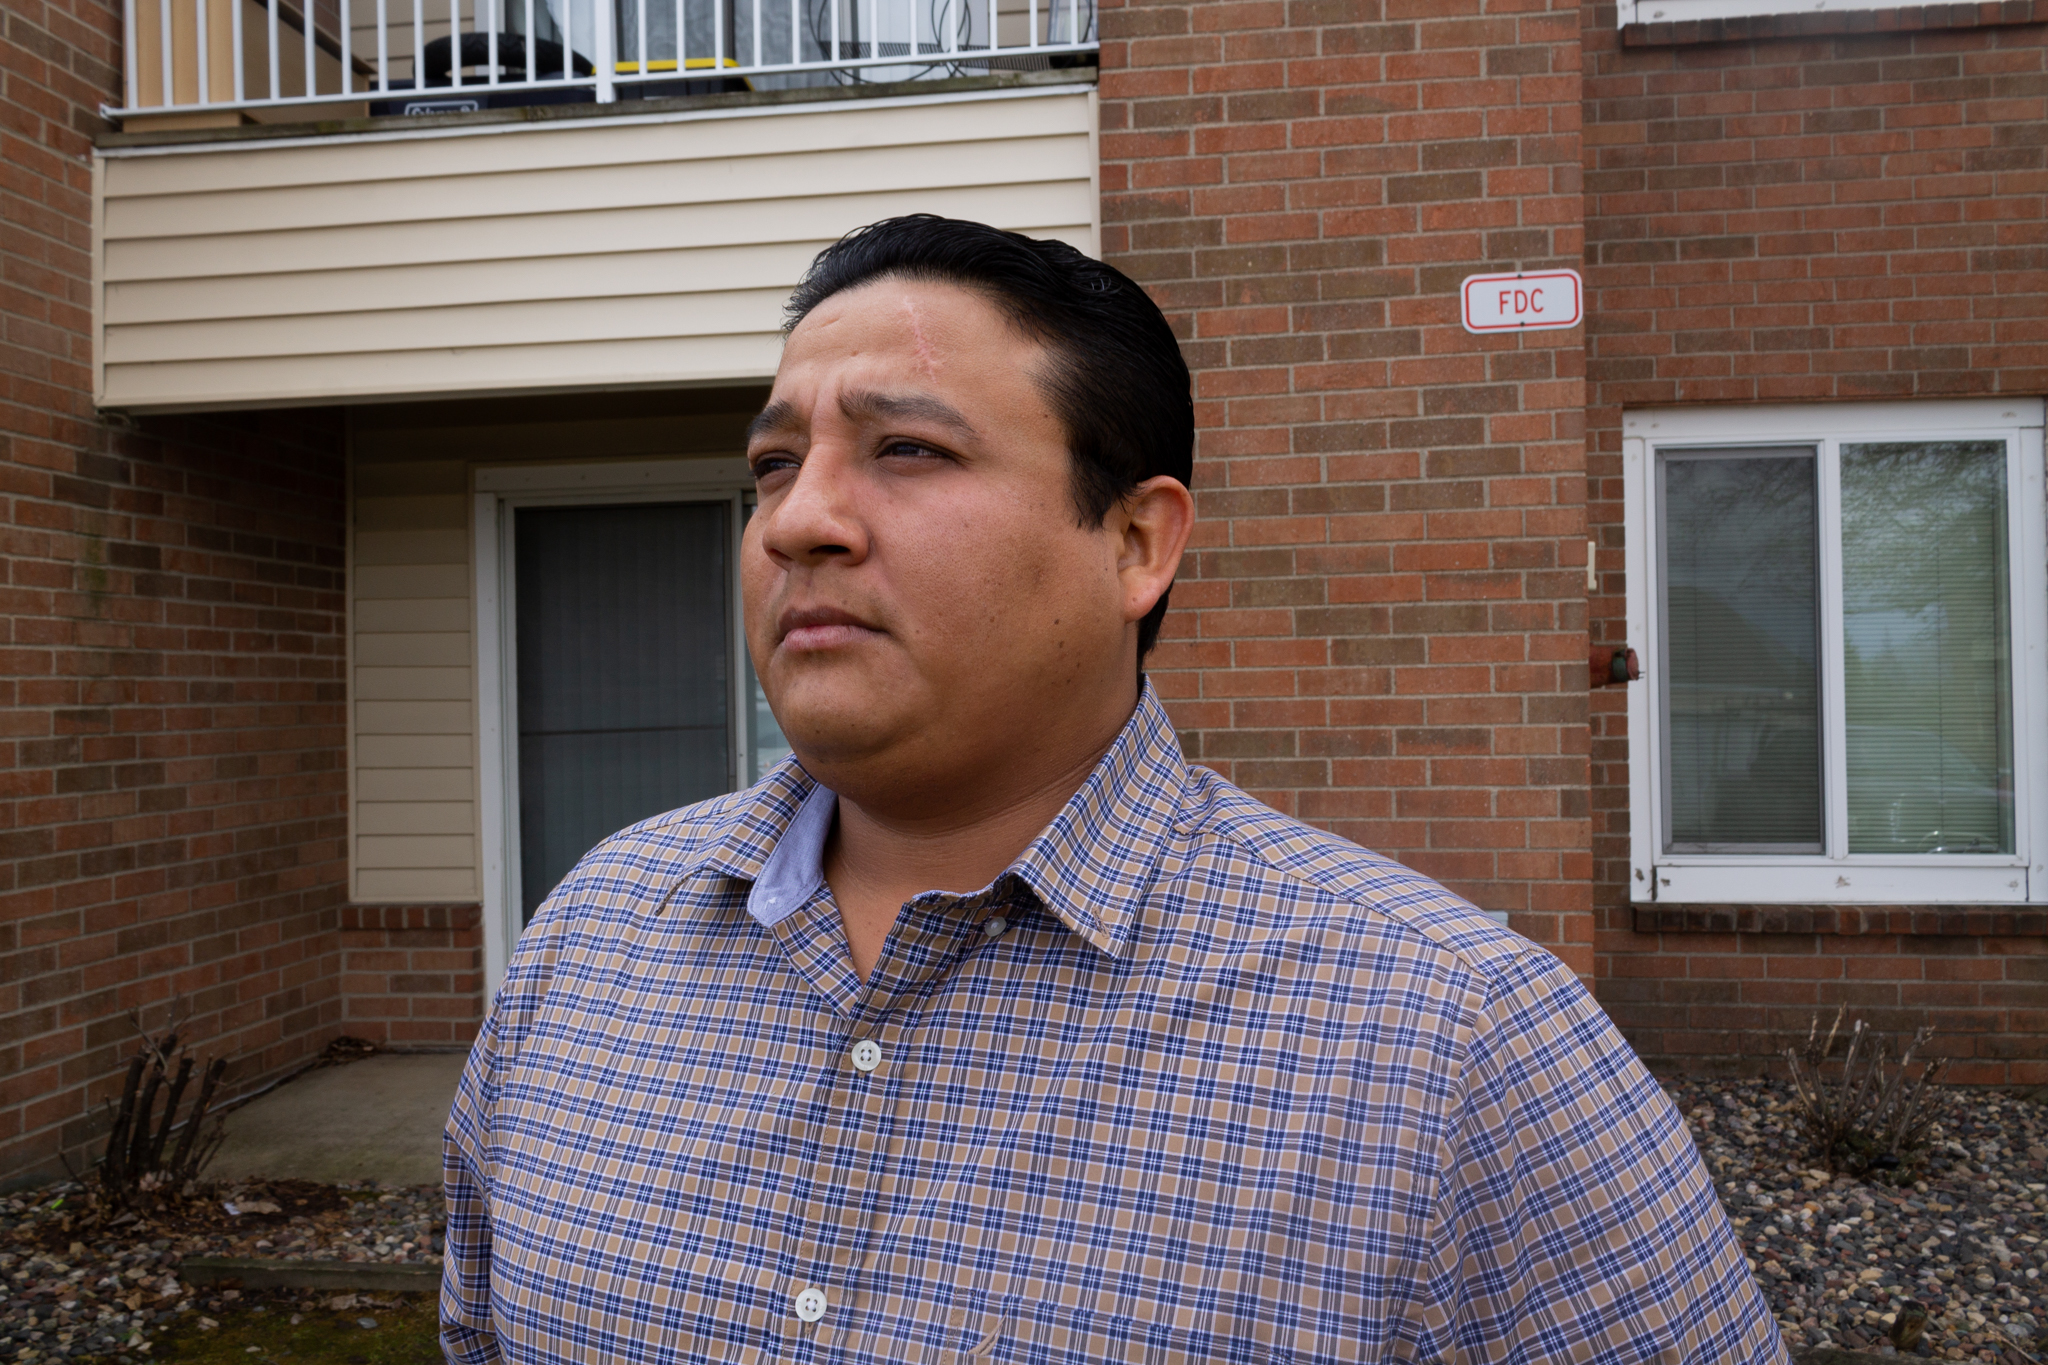 José Alfredo Gómez standing in front of his home. He has a large scar on his forehead from falling two stories while working on a construction site.